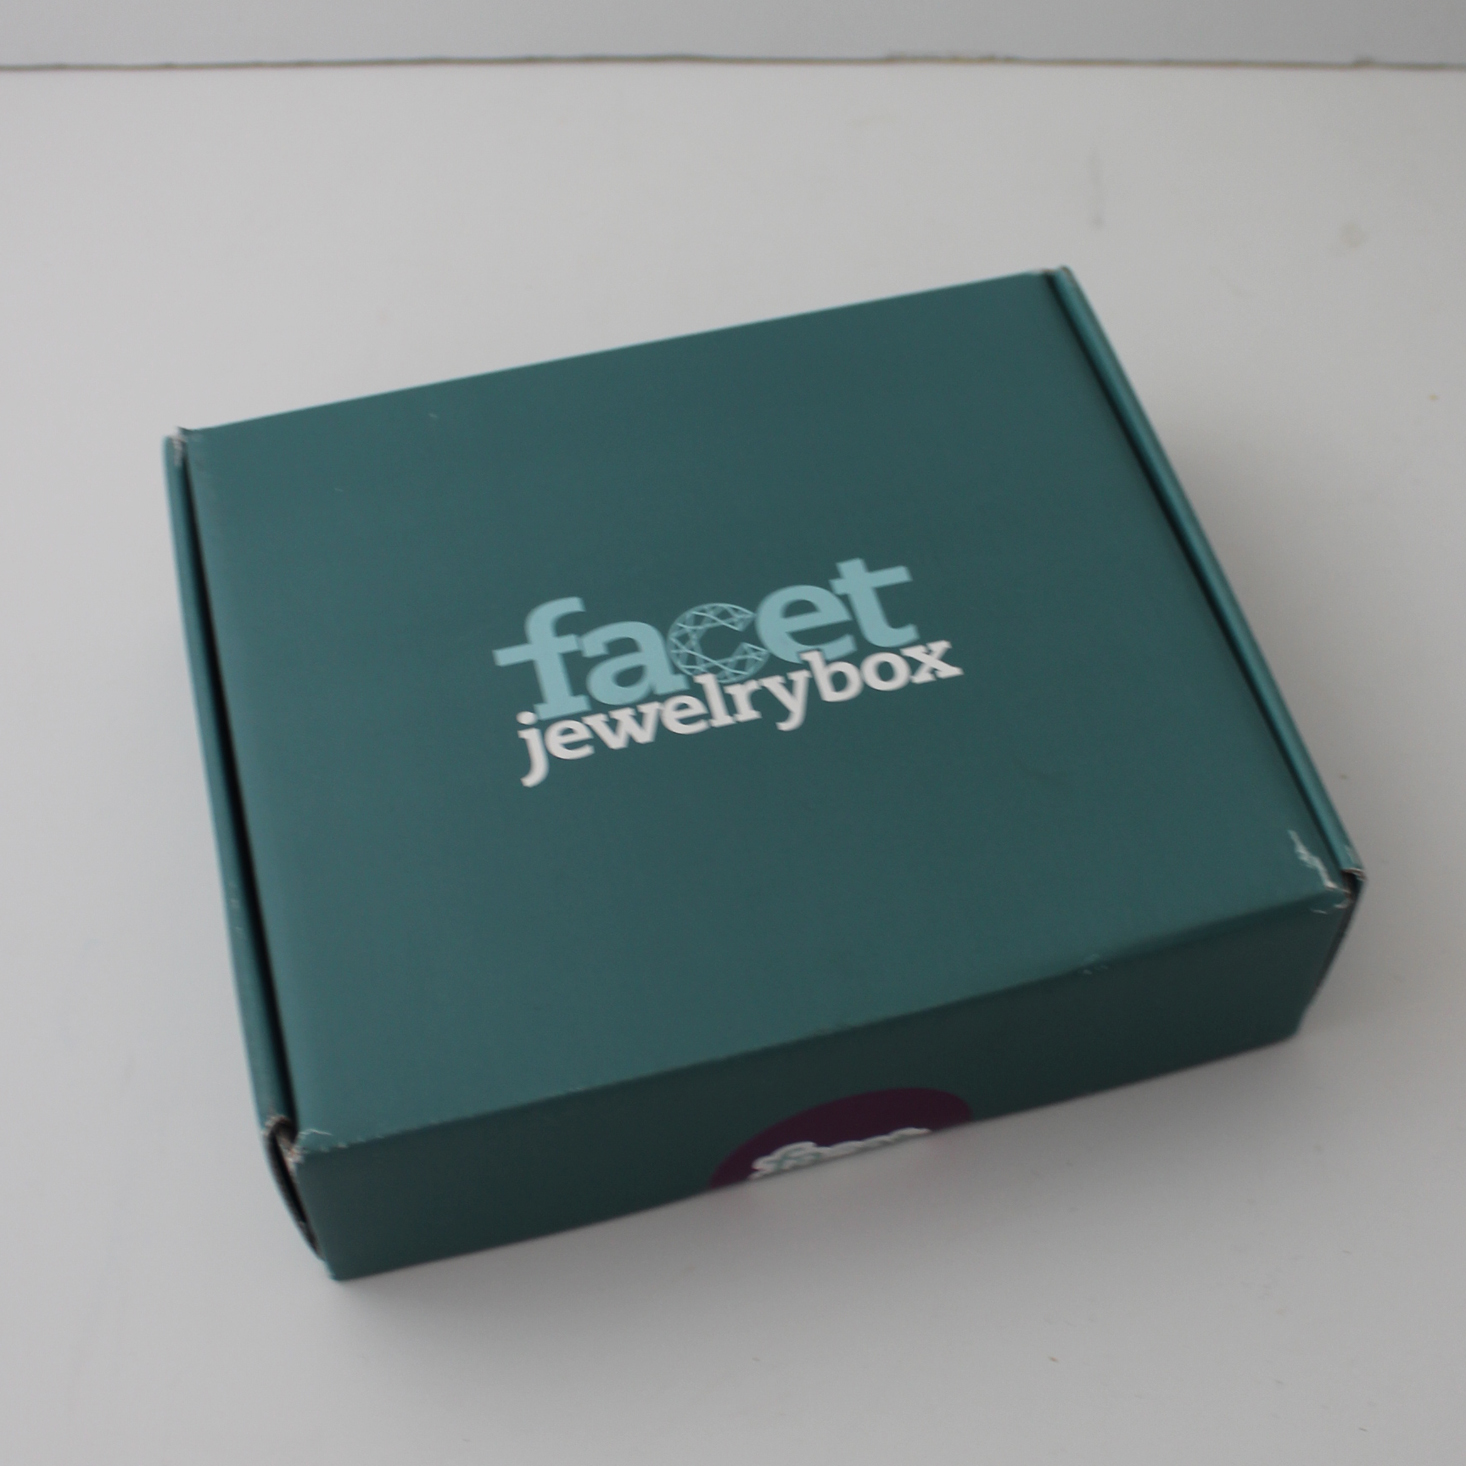 Facet Jewelry Box Bead Stringing Review + Coupon – October 2018